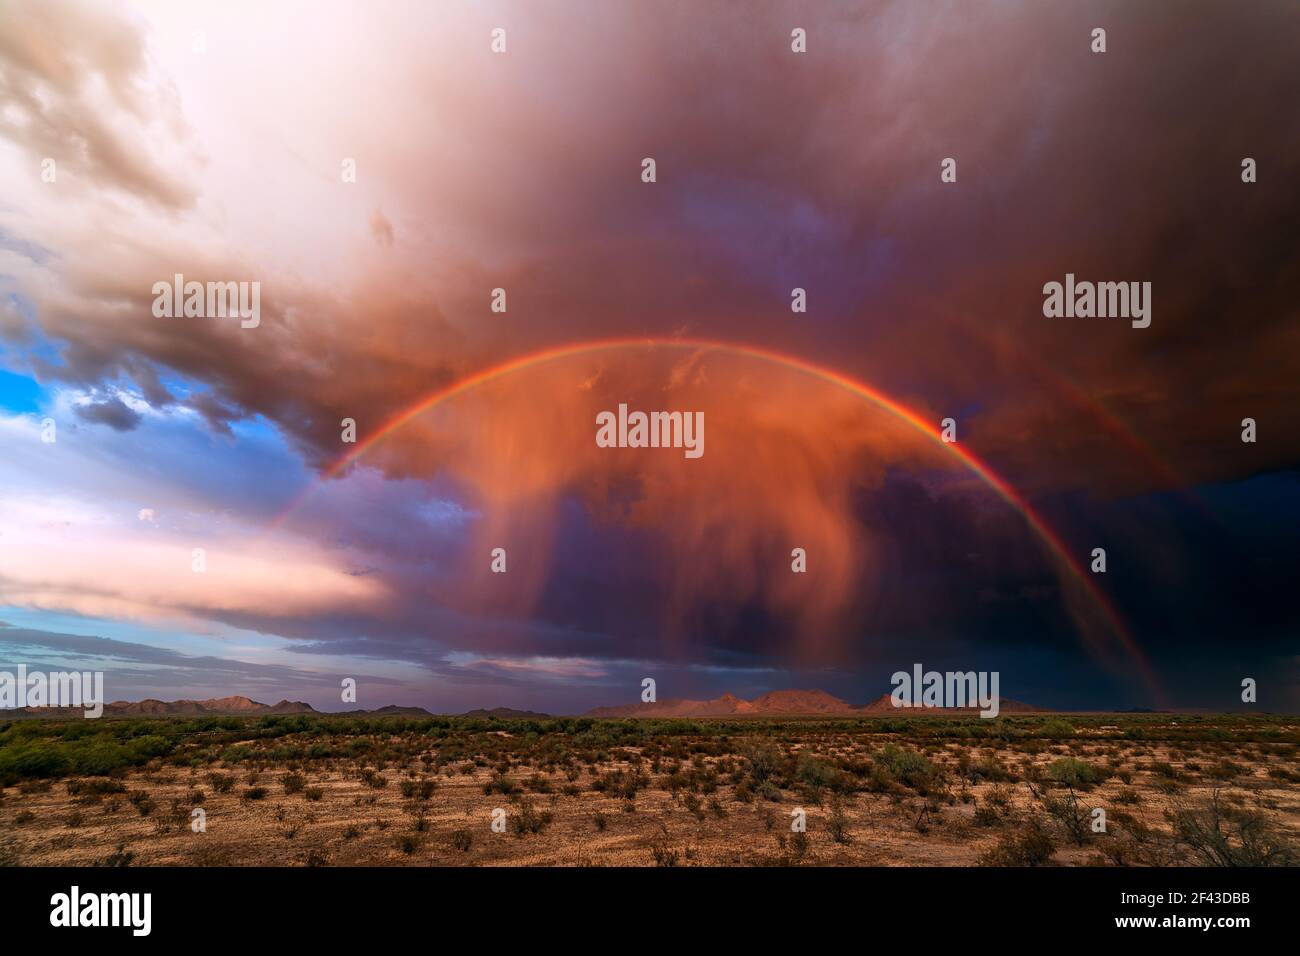 Monsoon storm and desert landscape with a rainbow, virga, and dramatic clouds at sunset near Gila Bend, Arizona Stock Photo